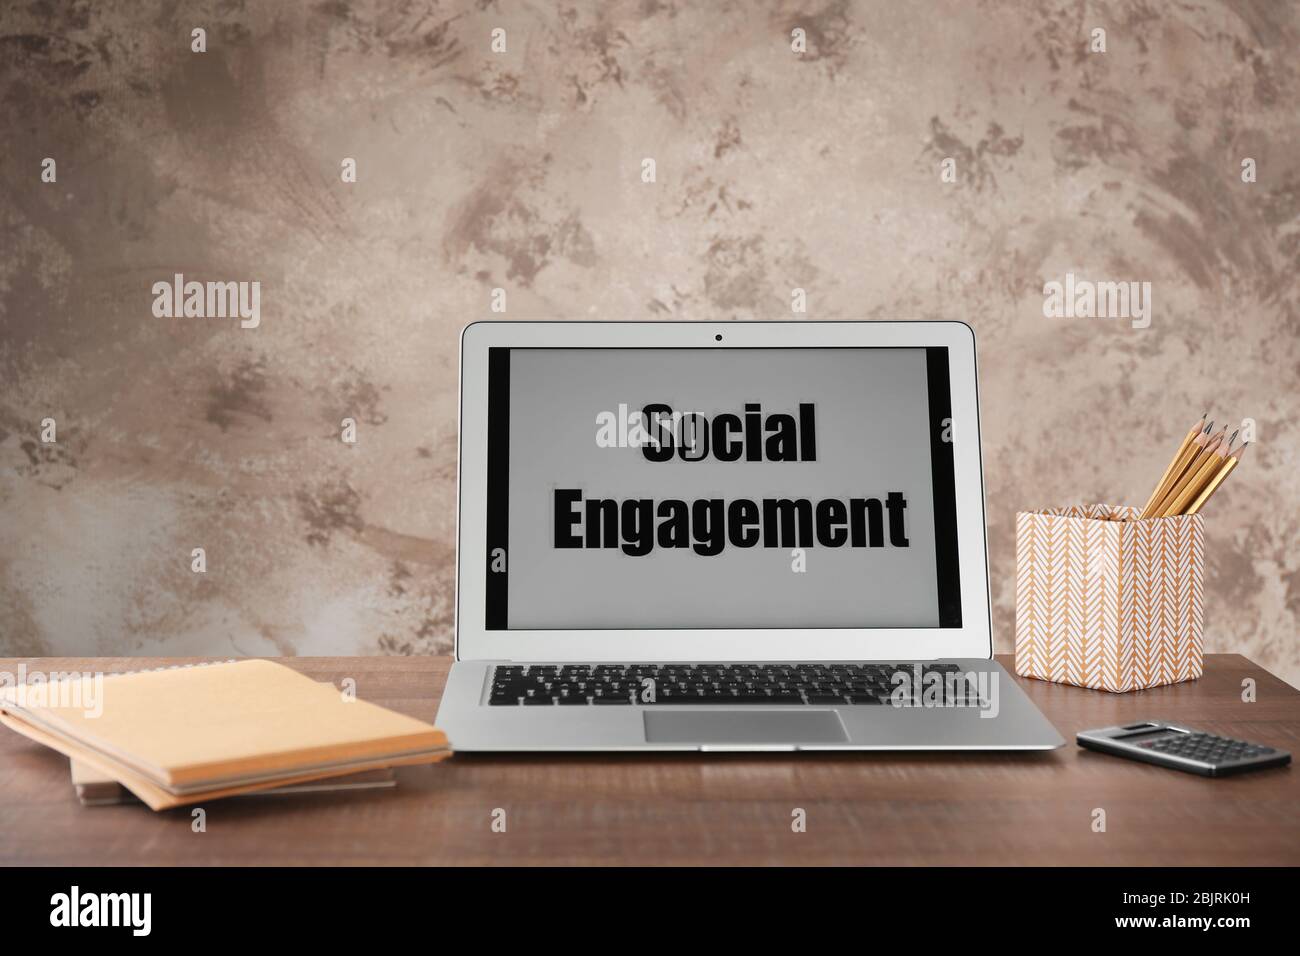 Laptop with text SOCIAL ENGAGEMENT on office table Stock Photo